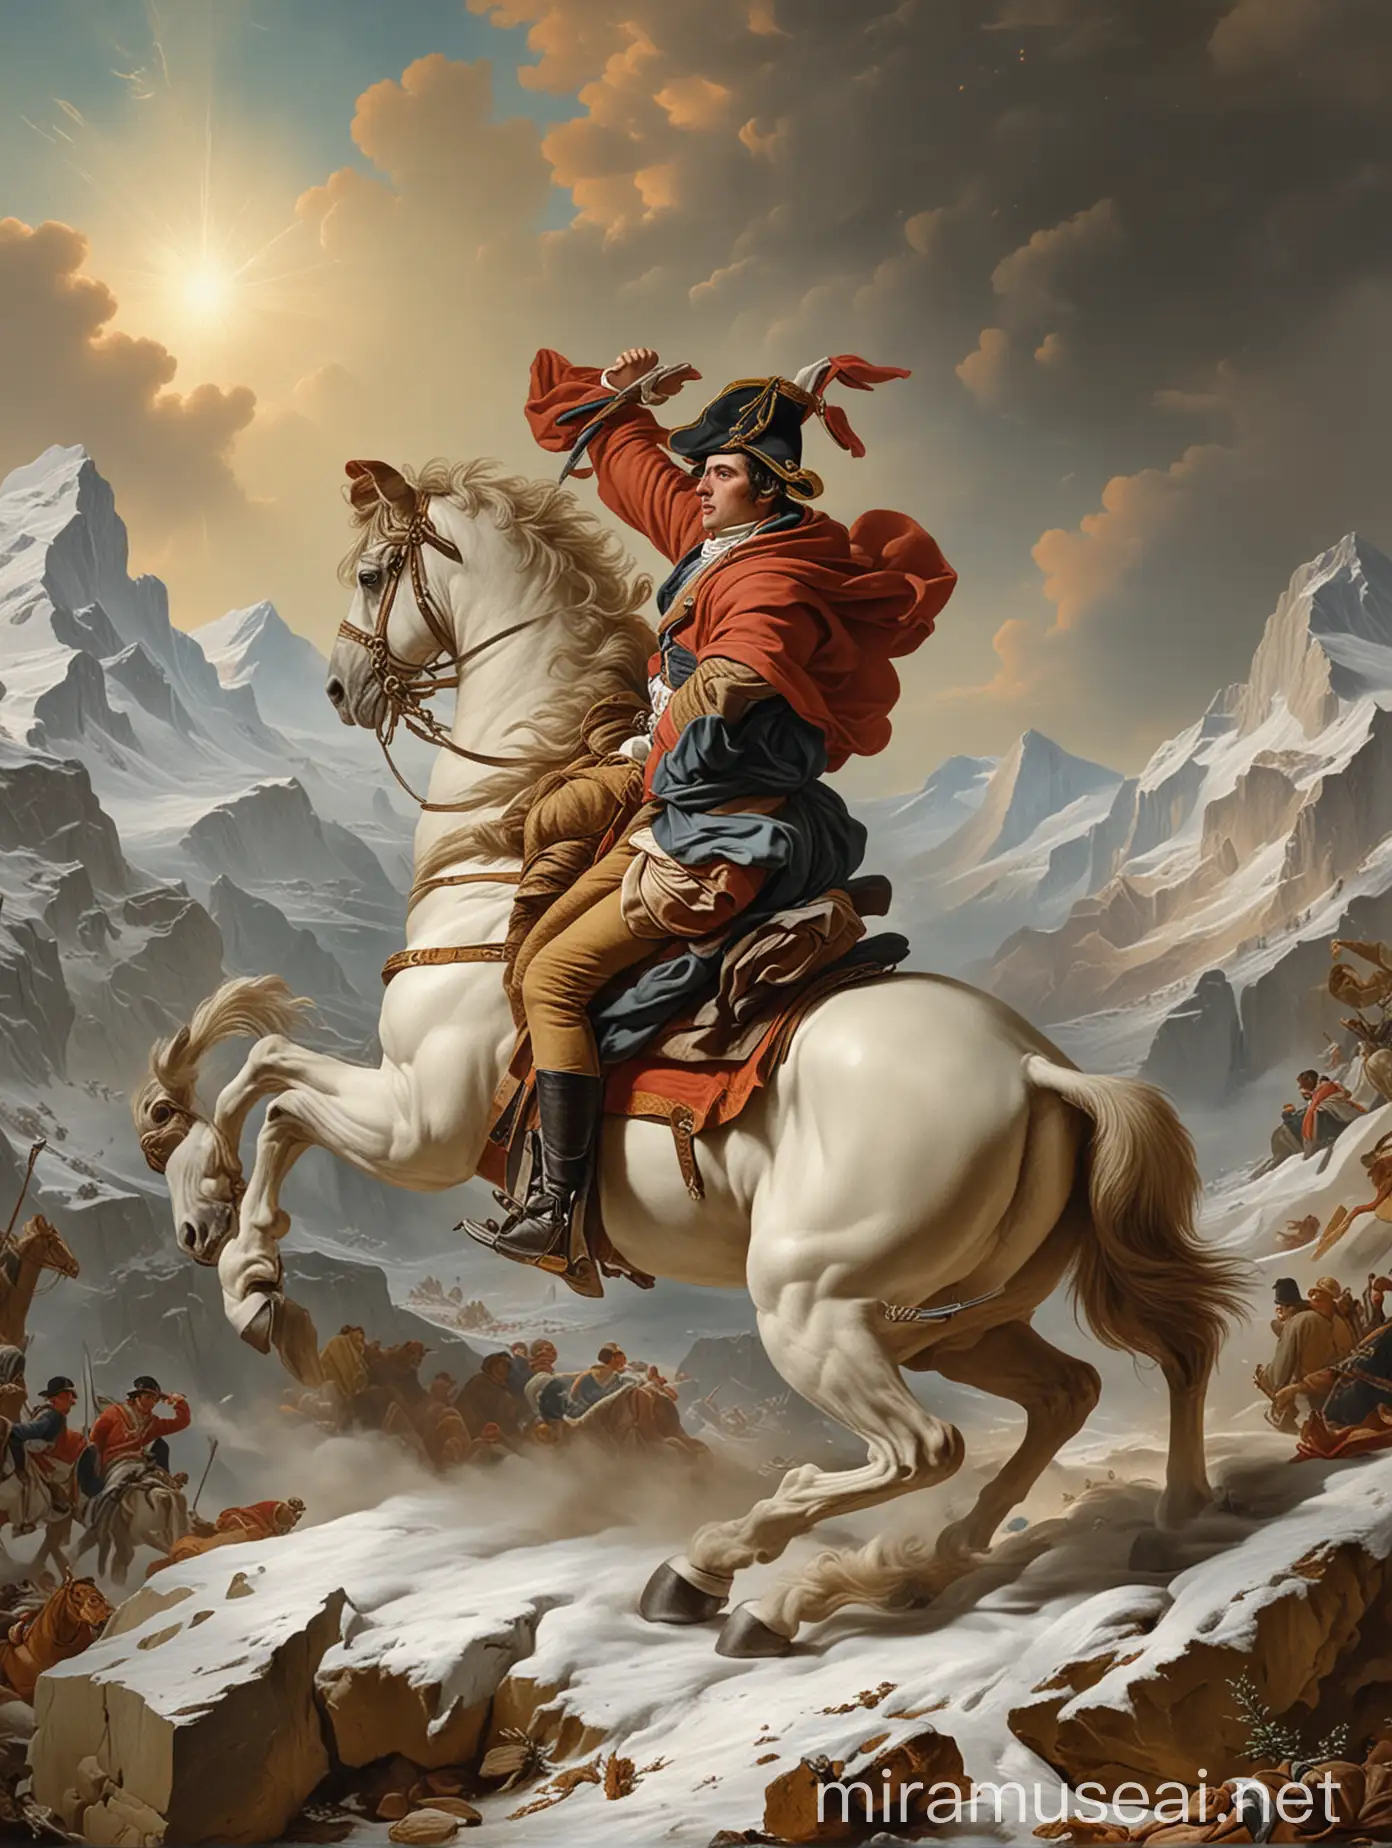 Highly detailed painting closely based on (("Napoleon Crossing The Alps" by Jacques-Louis David)), a ringed planet is in the sky, use muted colors only, high quality